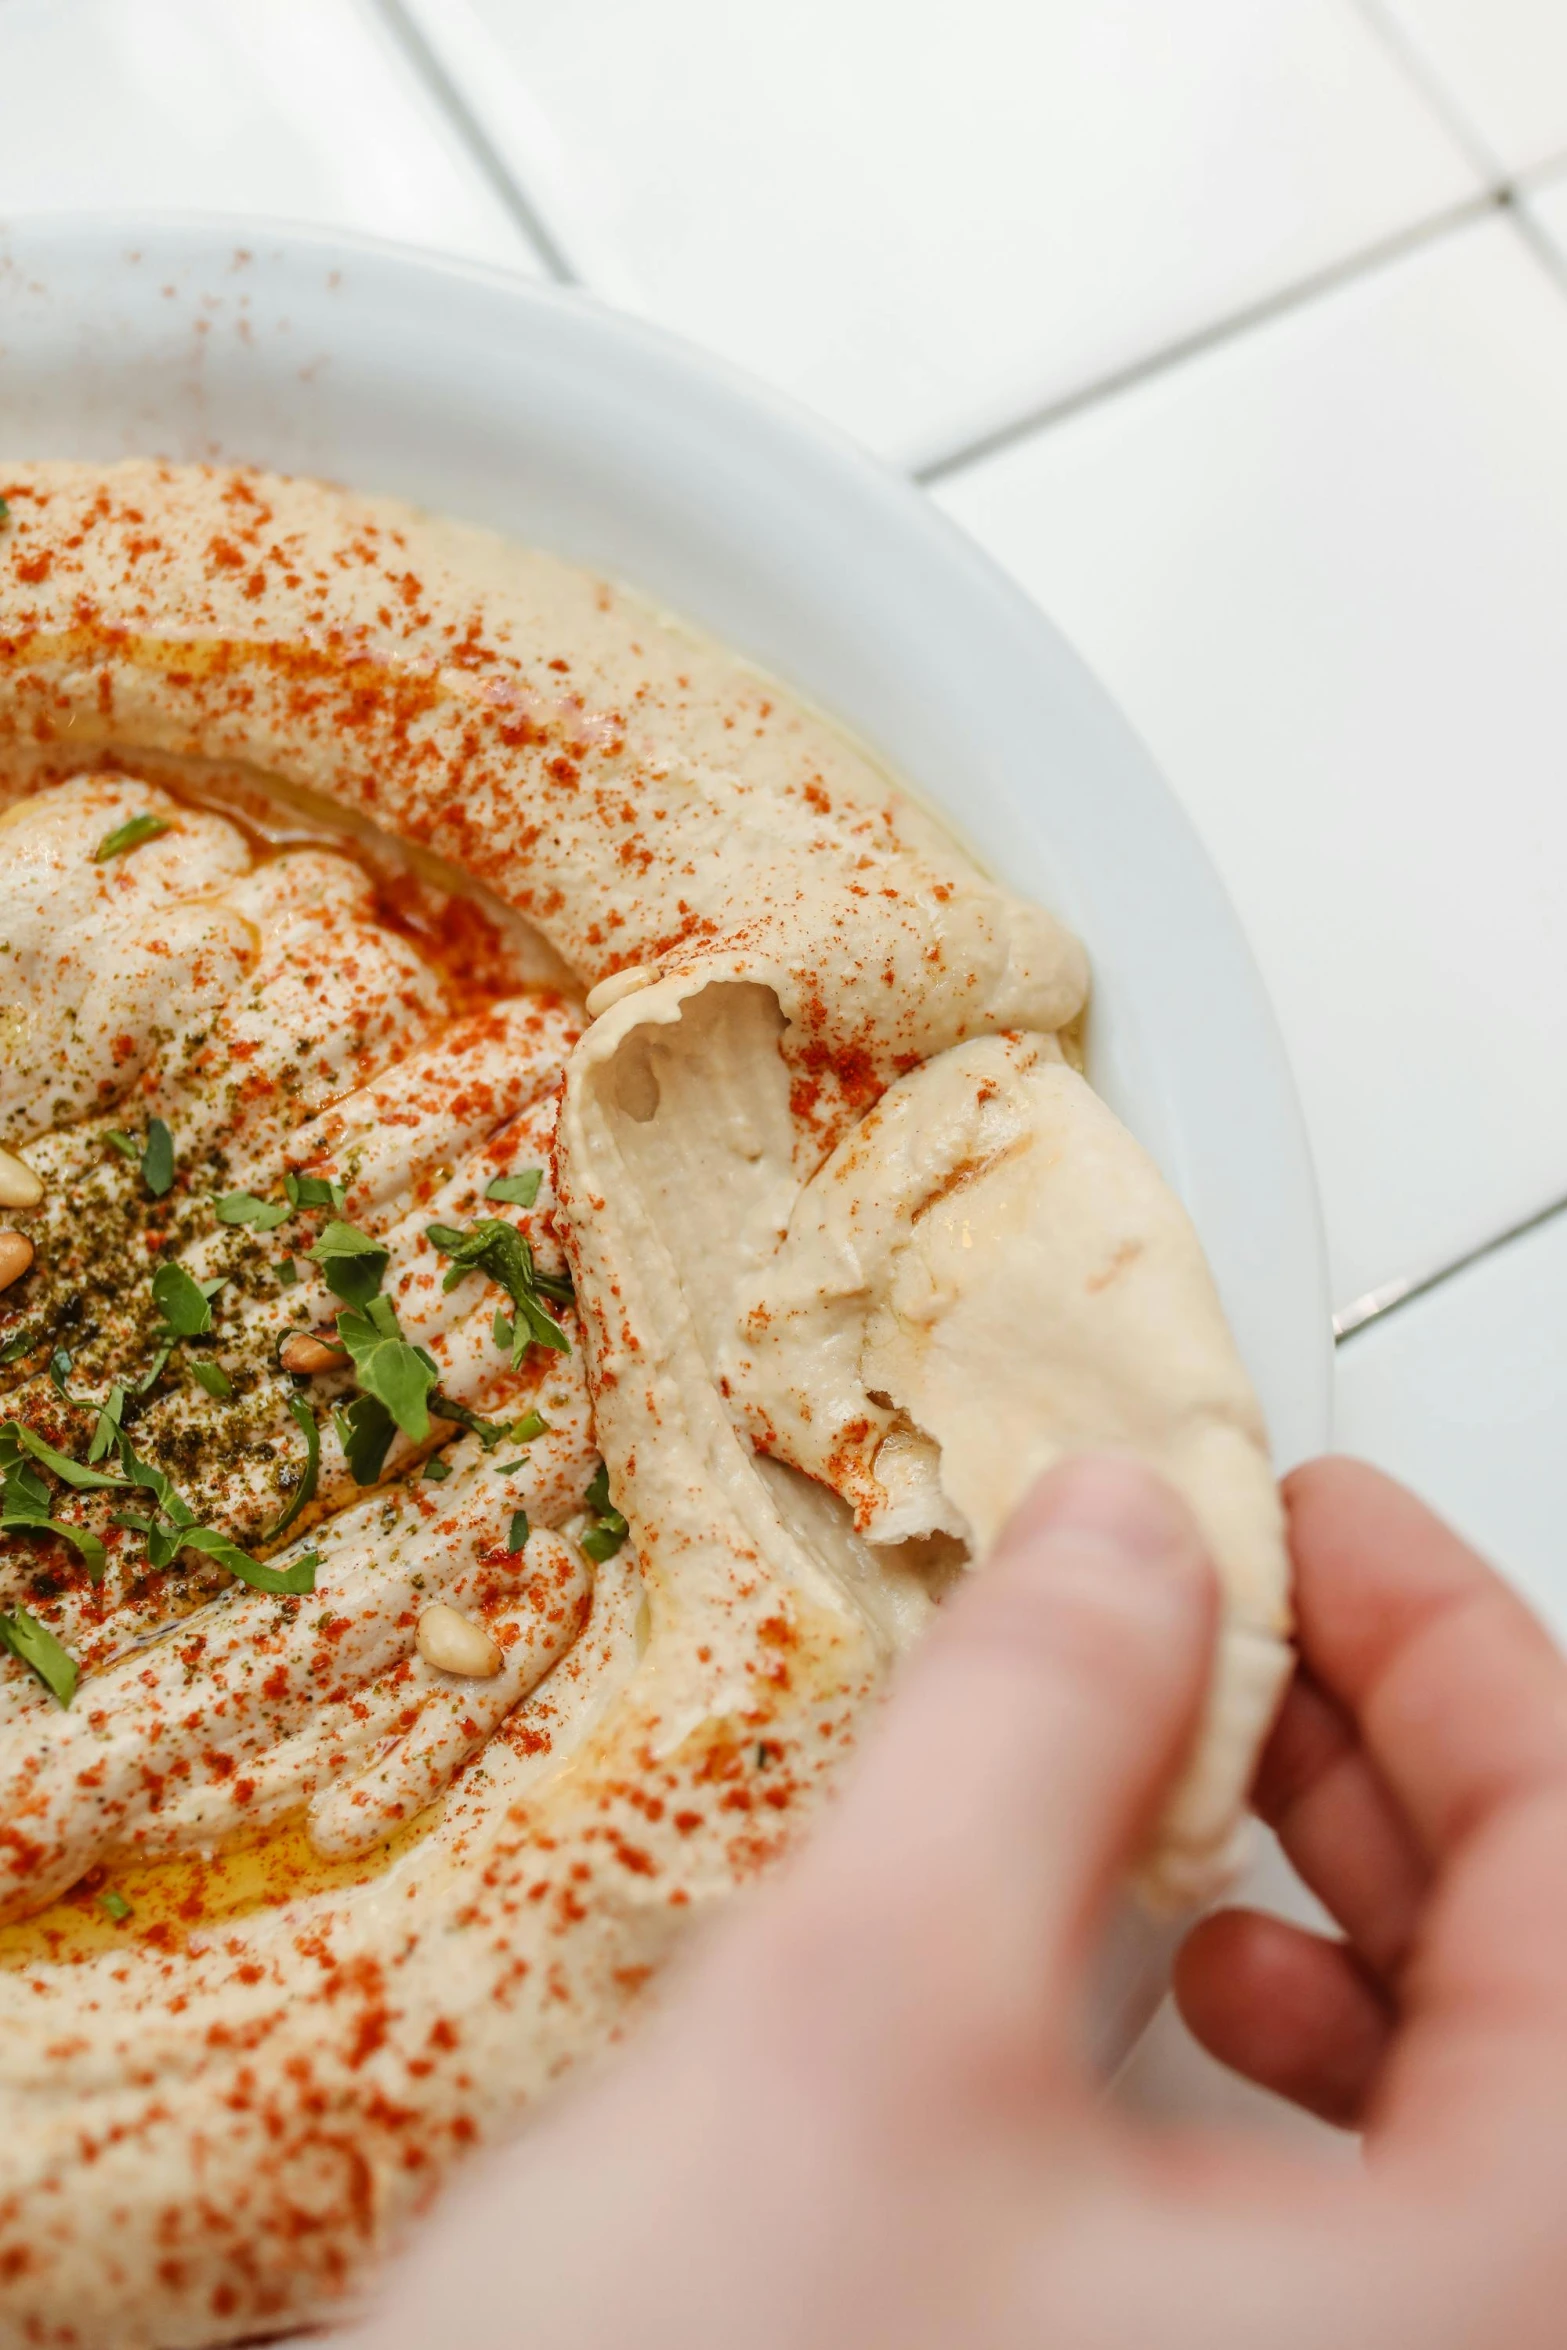 a close up of a plate of food on a table, dau-al-set, humus, hand holding a knife, swirling around, lush